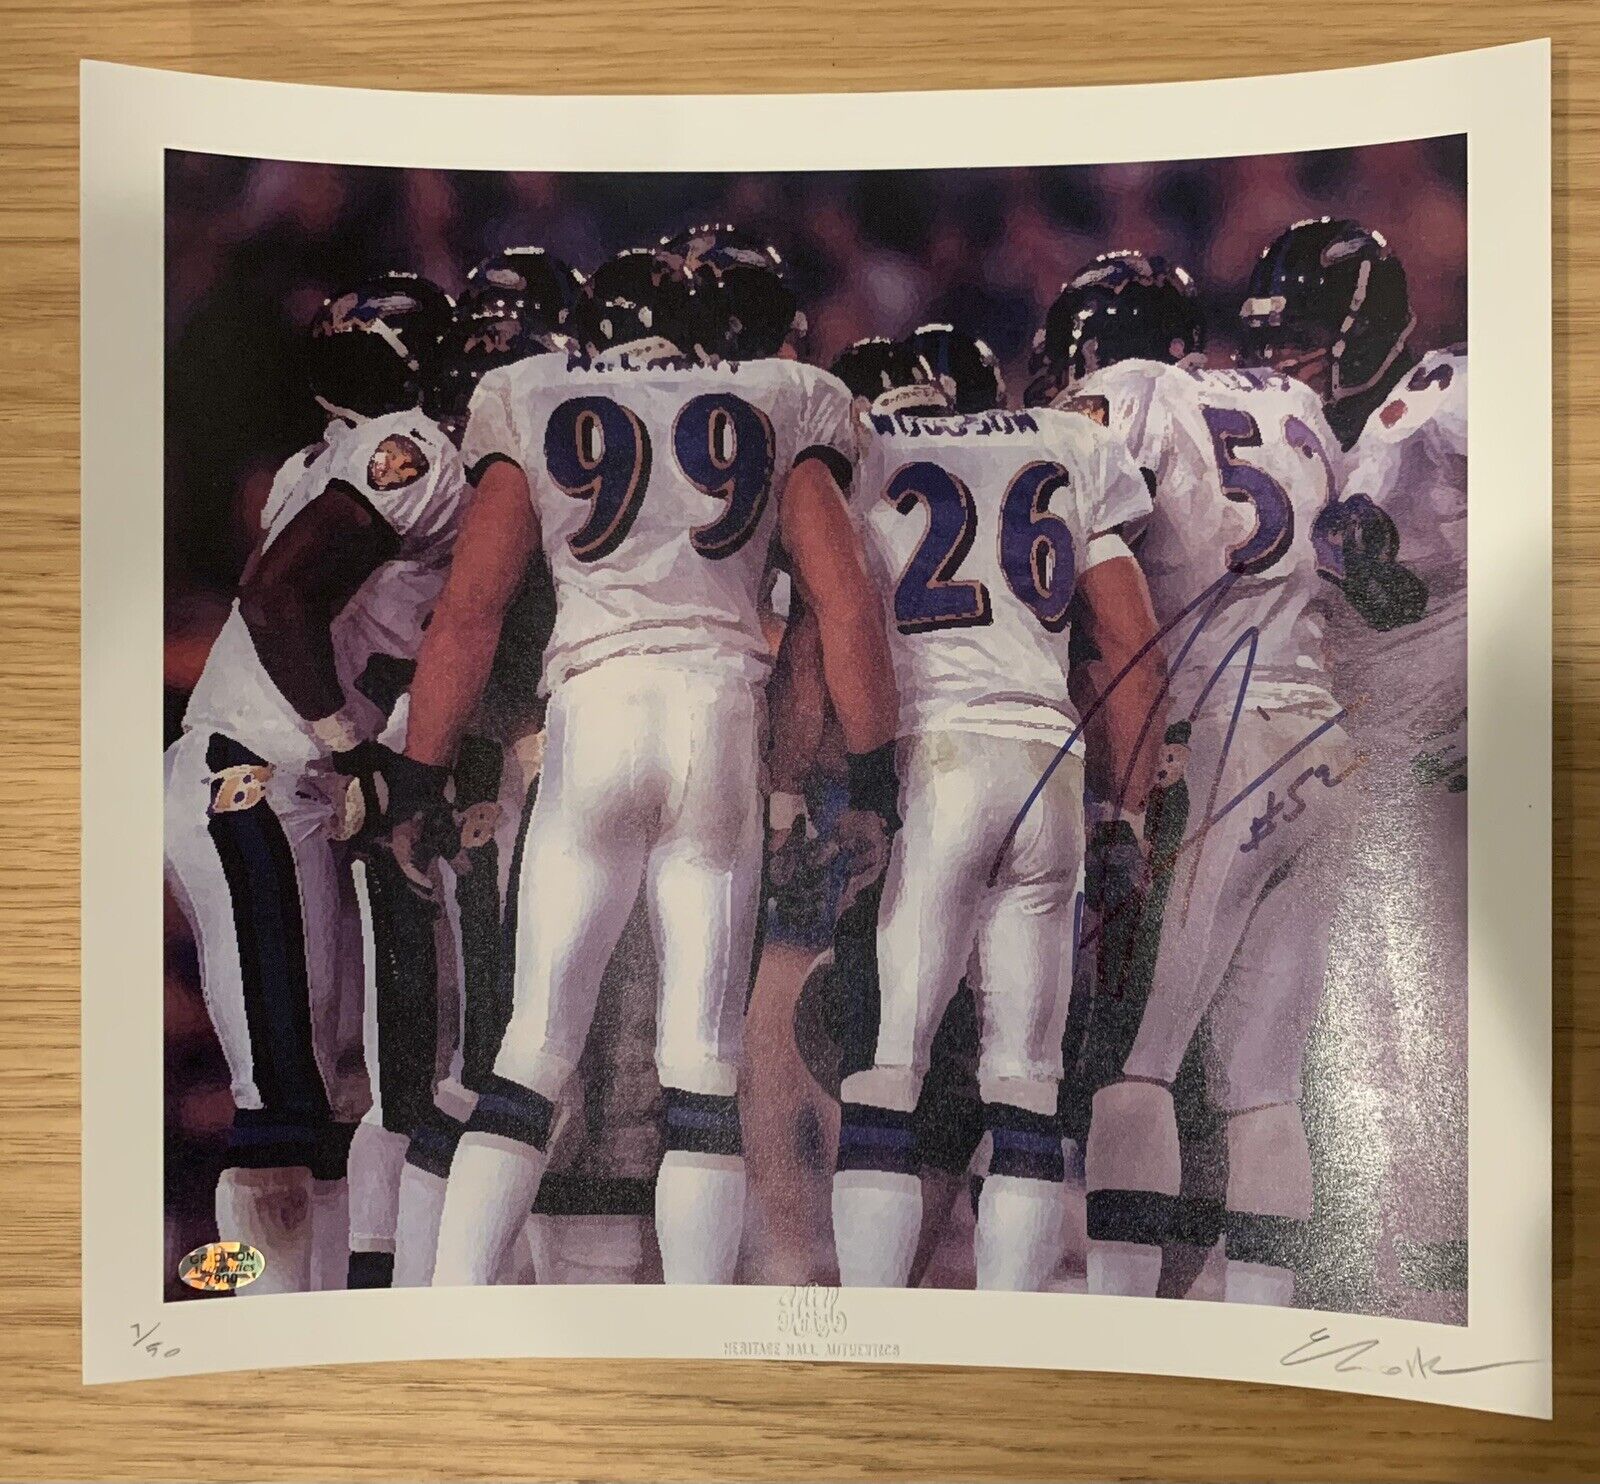 Ray Lewis Auto Signed Ravens Limted Edition Super Bowl 35 Lithograph #/50 Coa